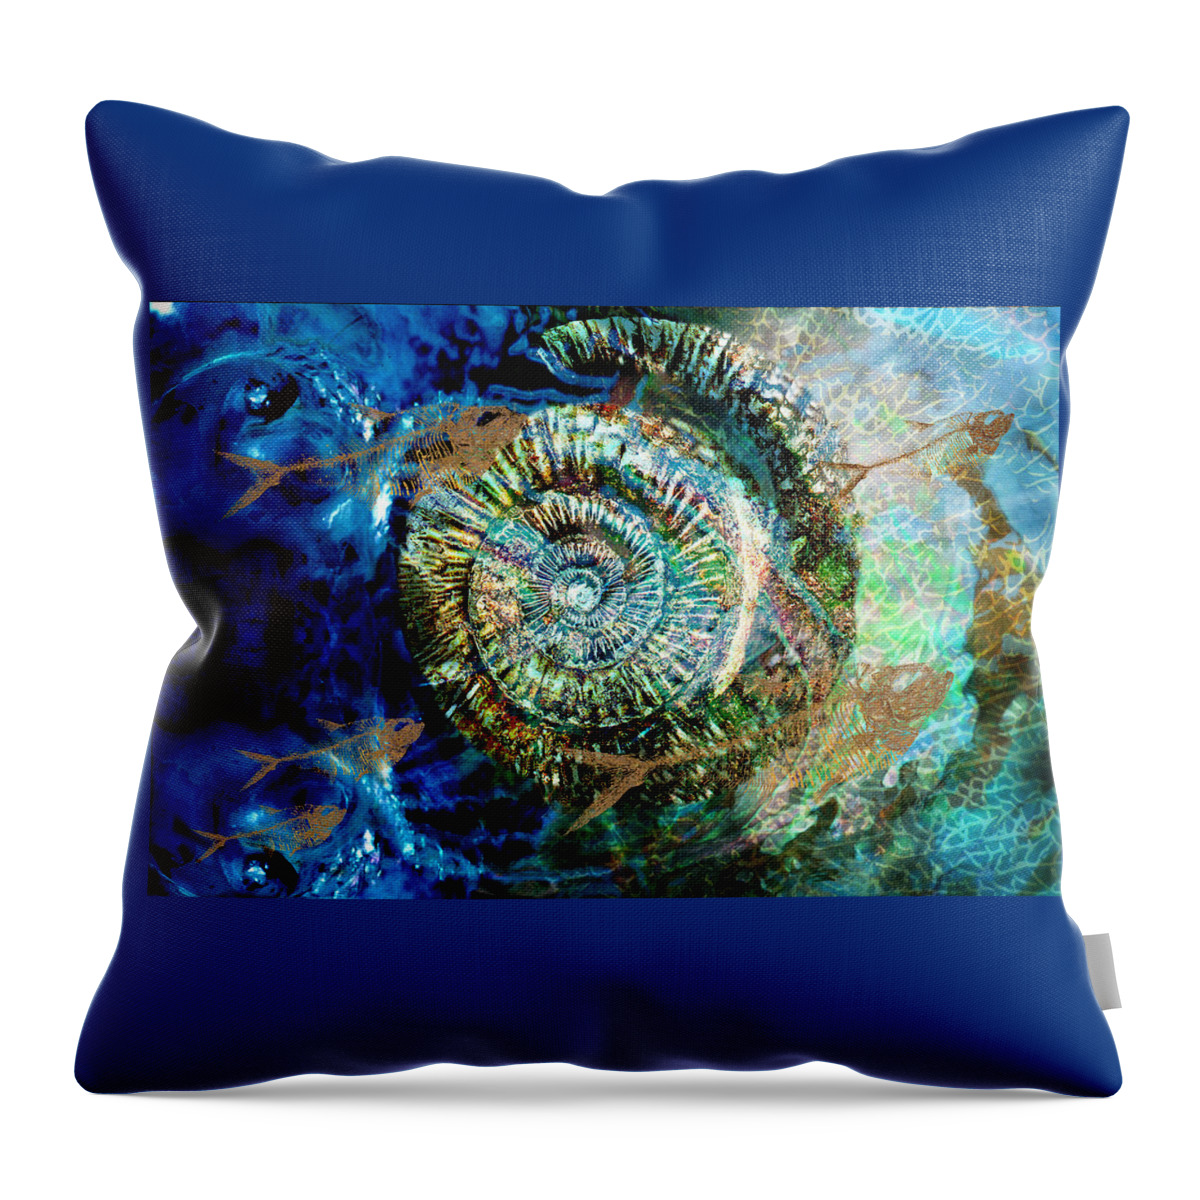 Fossil Throw Pillow featuring the digital art Fossil Seas by Lisa Yount